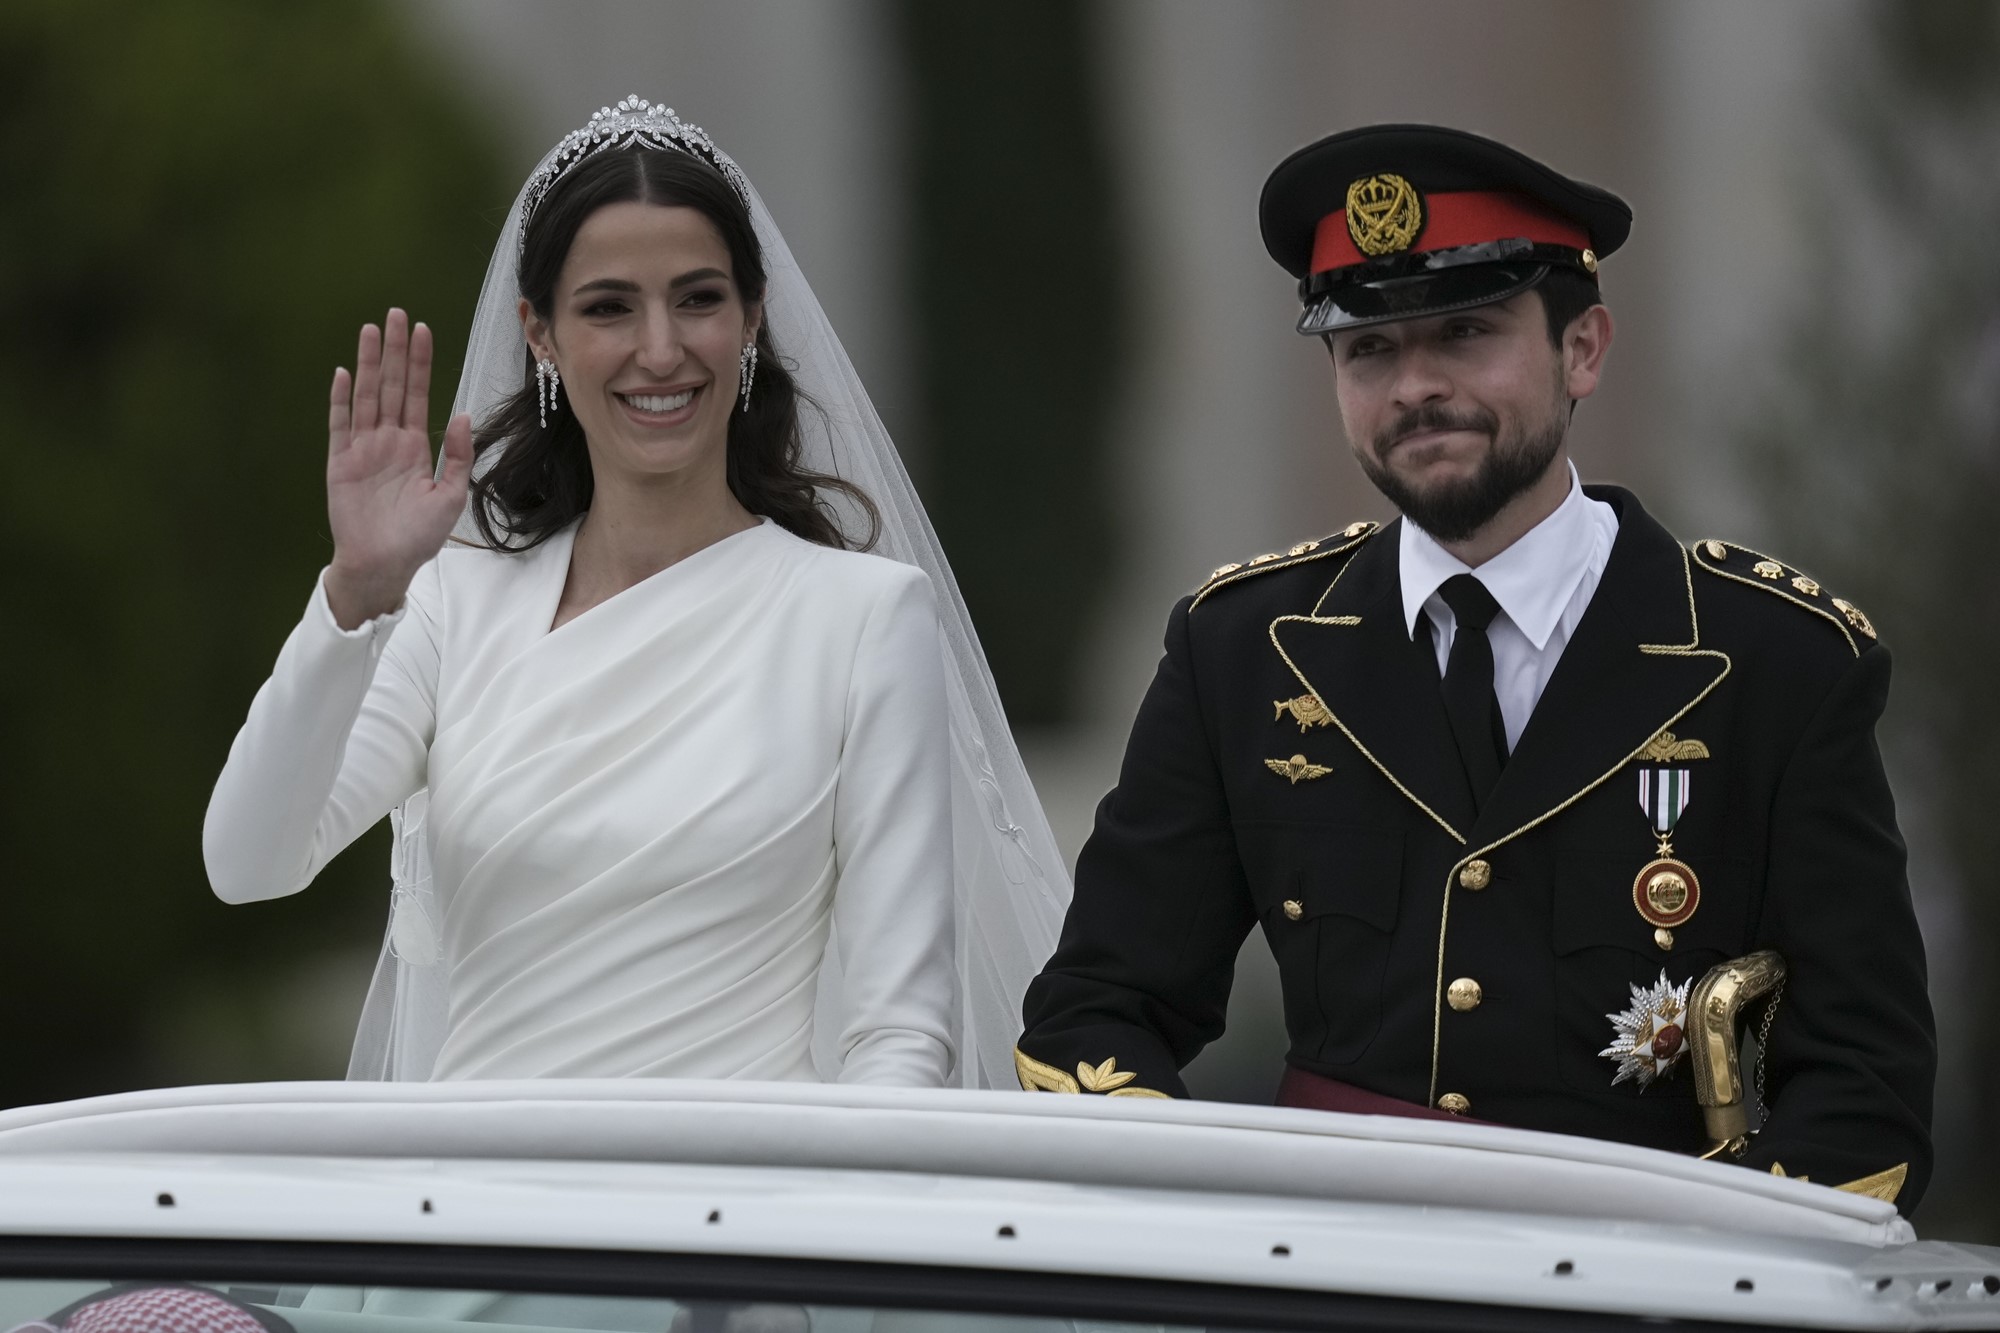 A bride in a white dress and veil, and a groom in a military outfit, smile and wave standing out the top of a moving vehicle